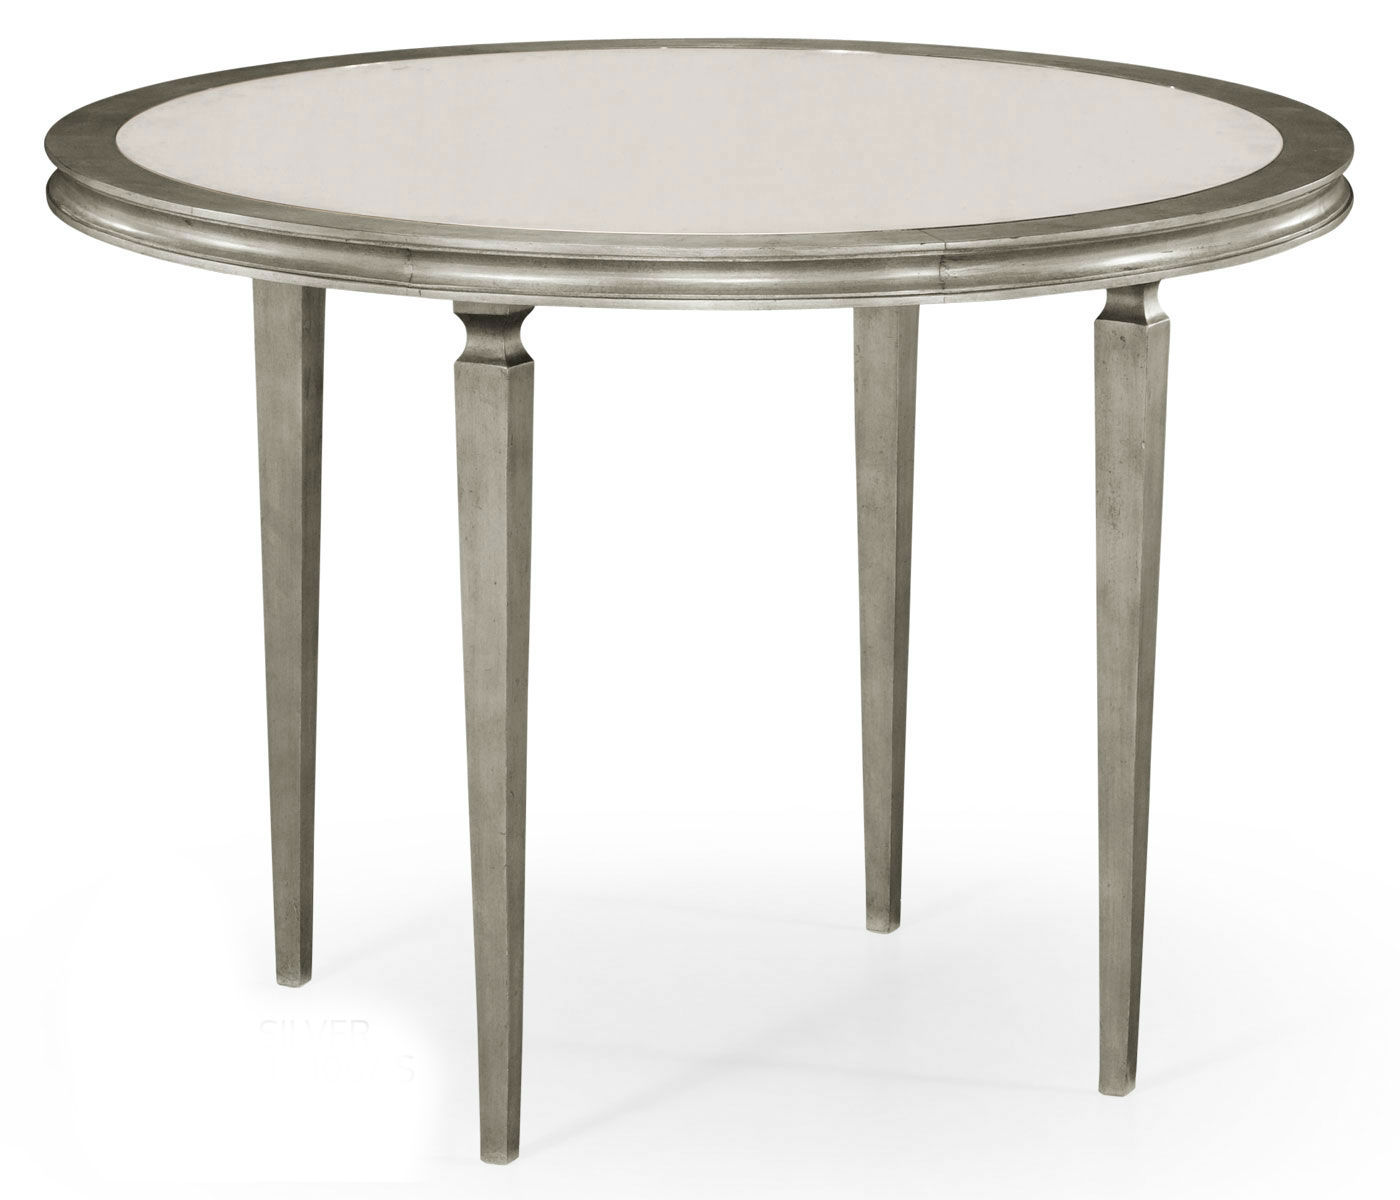 large side table round tables accent classic dia italian antique mirrored antiqued silver partner end console coffee available hospitality residential room essentials hairpin gold